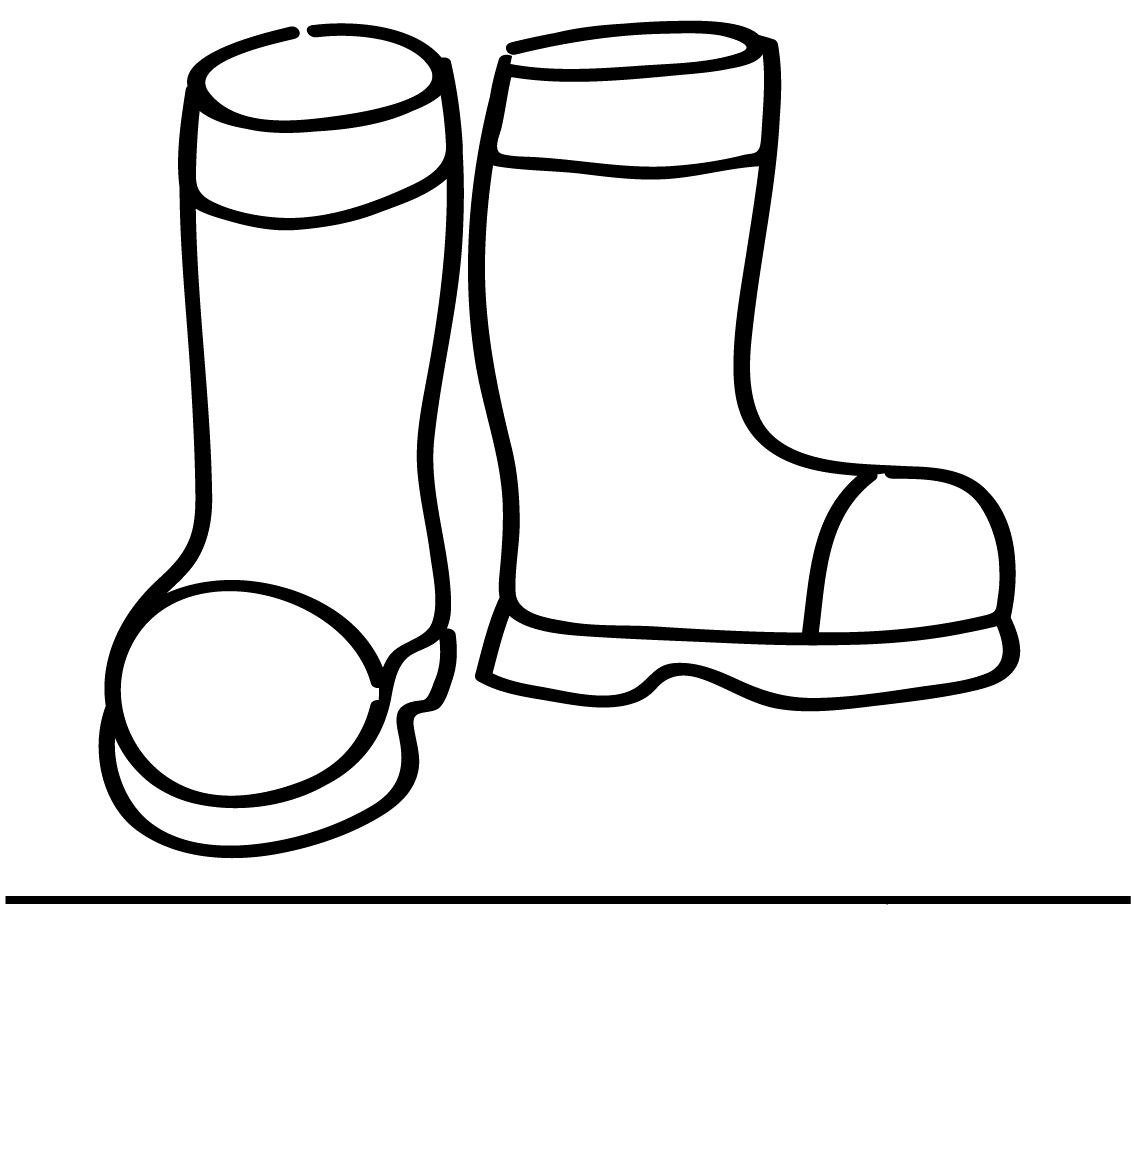 Black And White Wellies Clipart - ClipArt Best